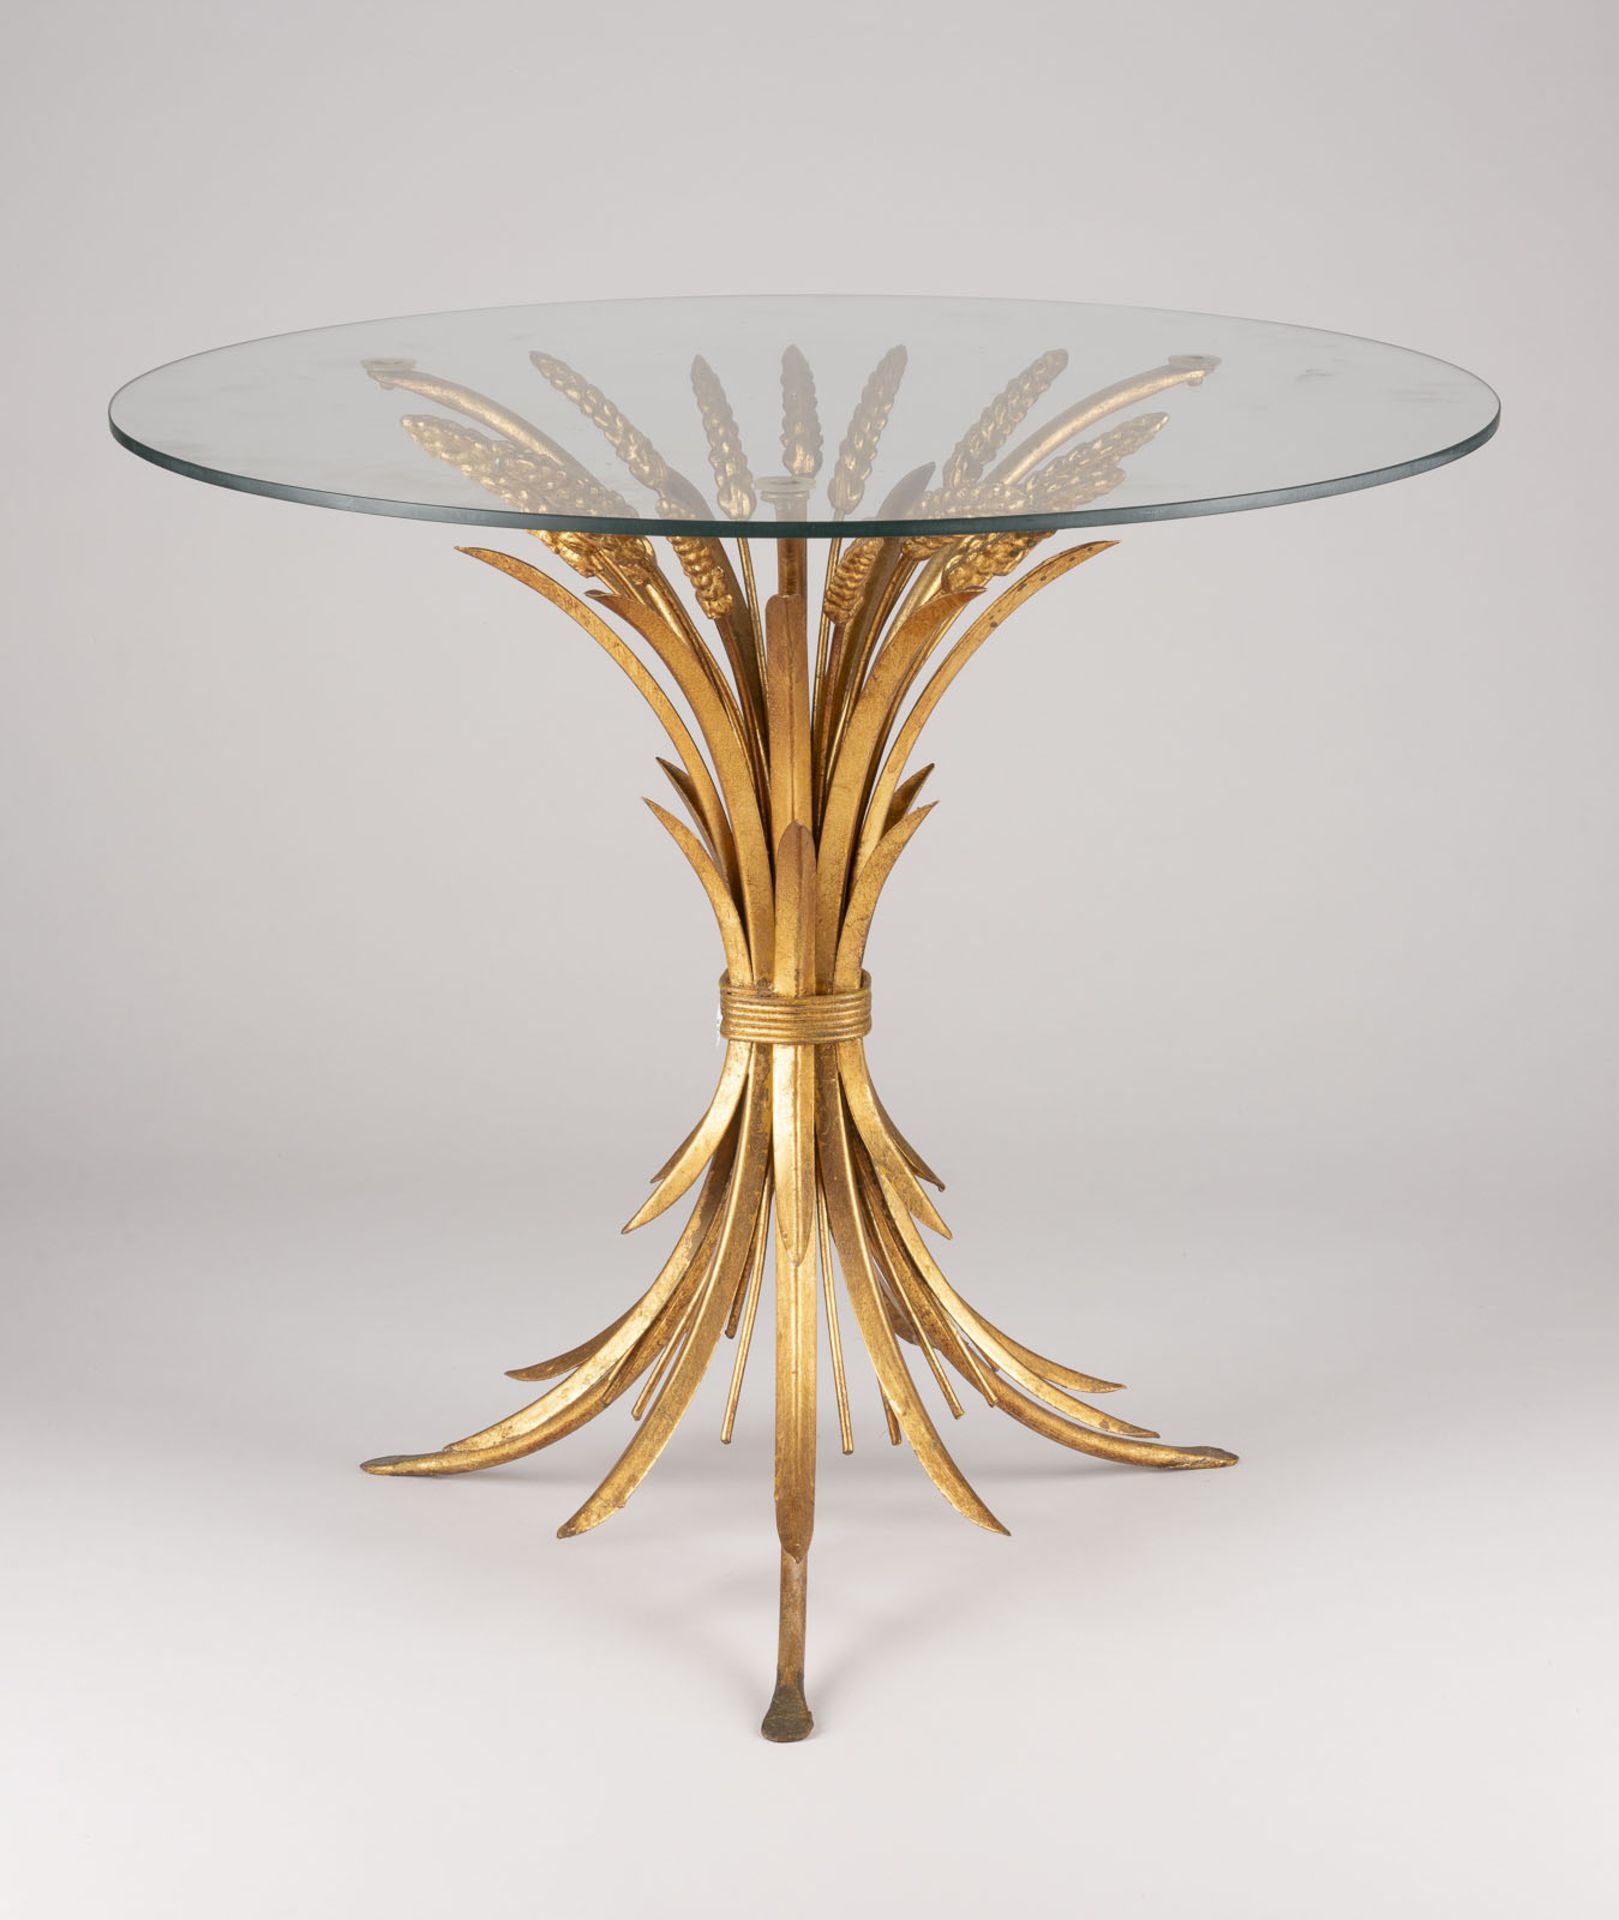 COCO CHANEL TISCH 'SHEAF OF WHEAT' TABLE Wohl Italien, um 1965 Glas, Untergestell Metall, goldfarbig